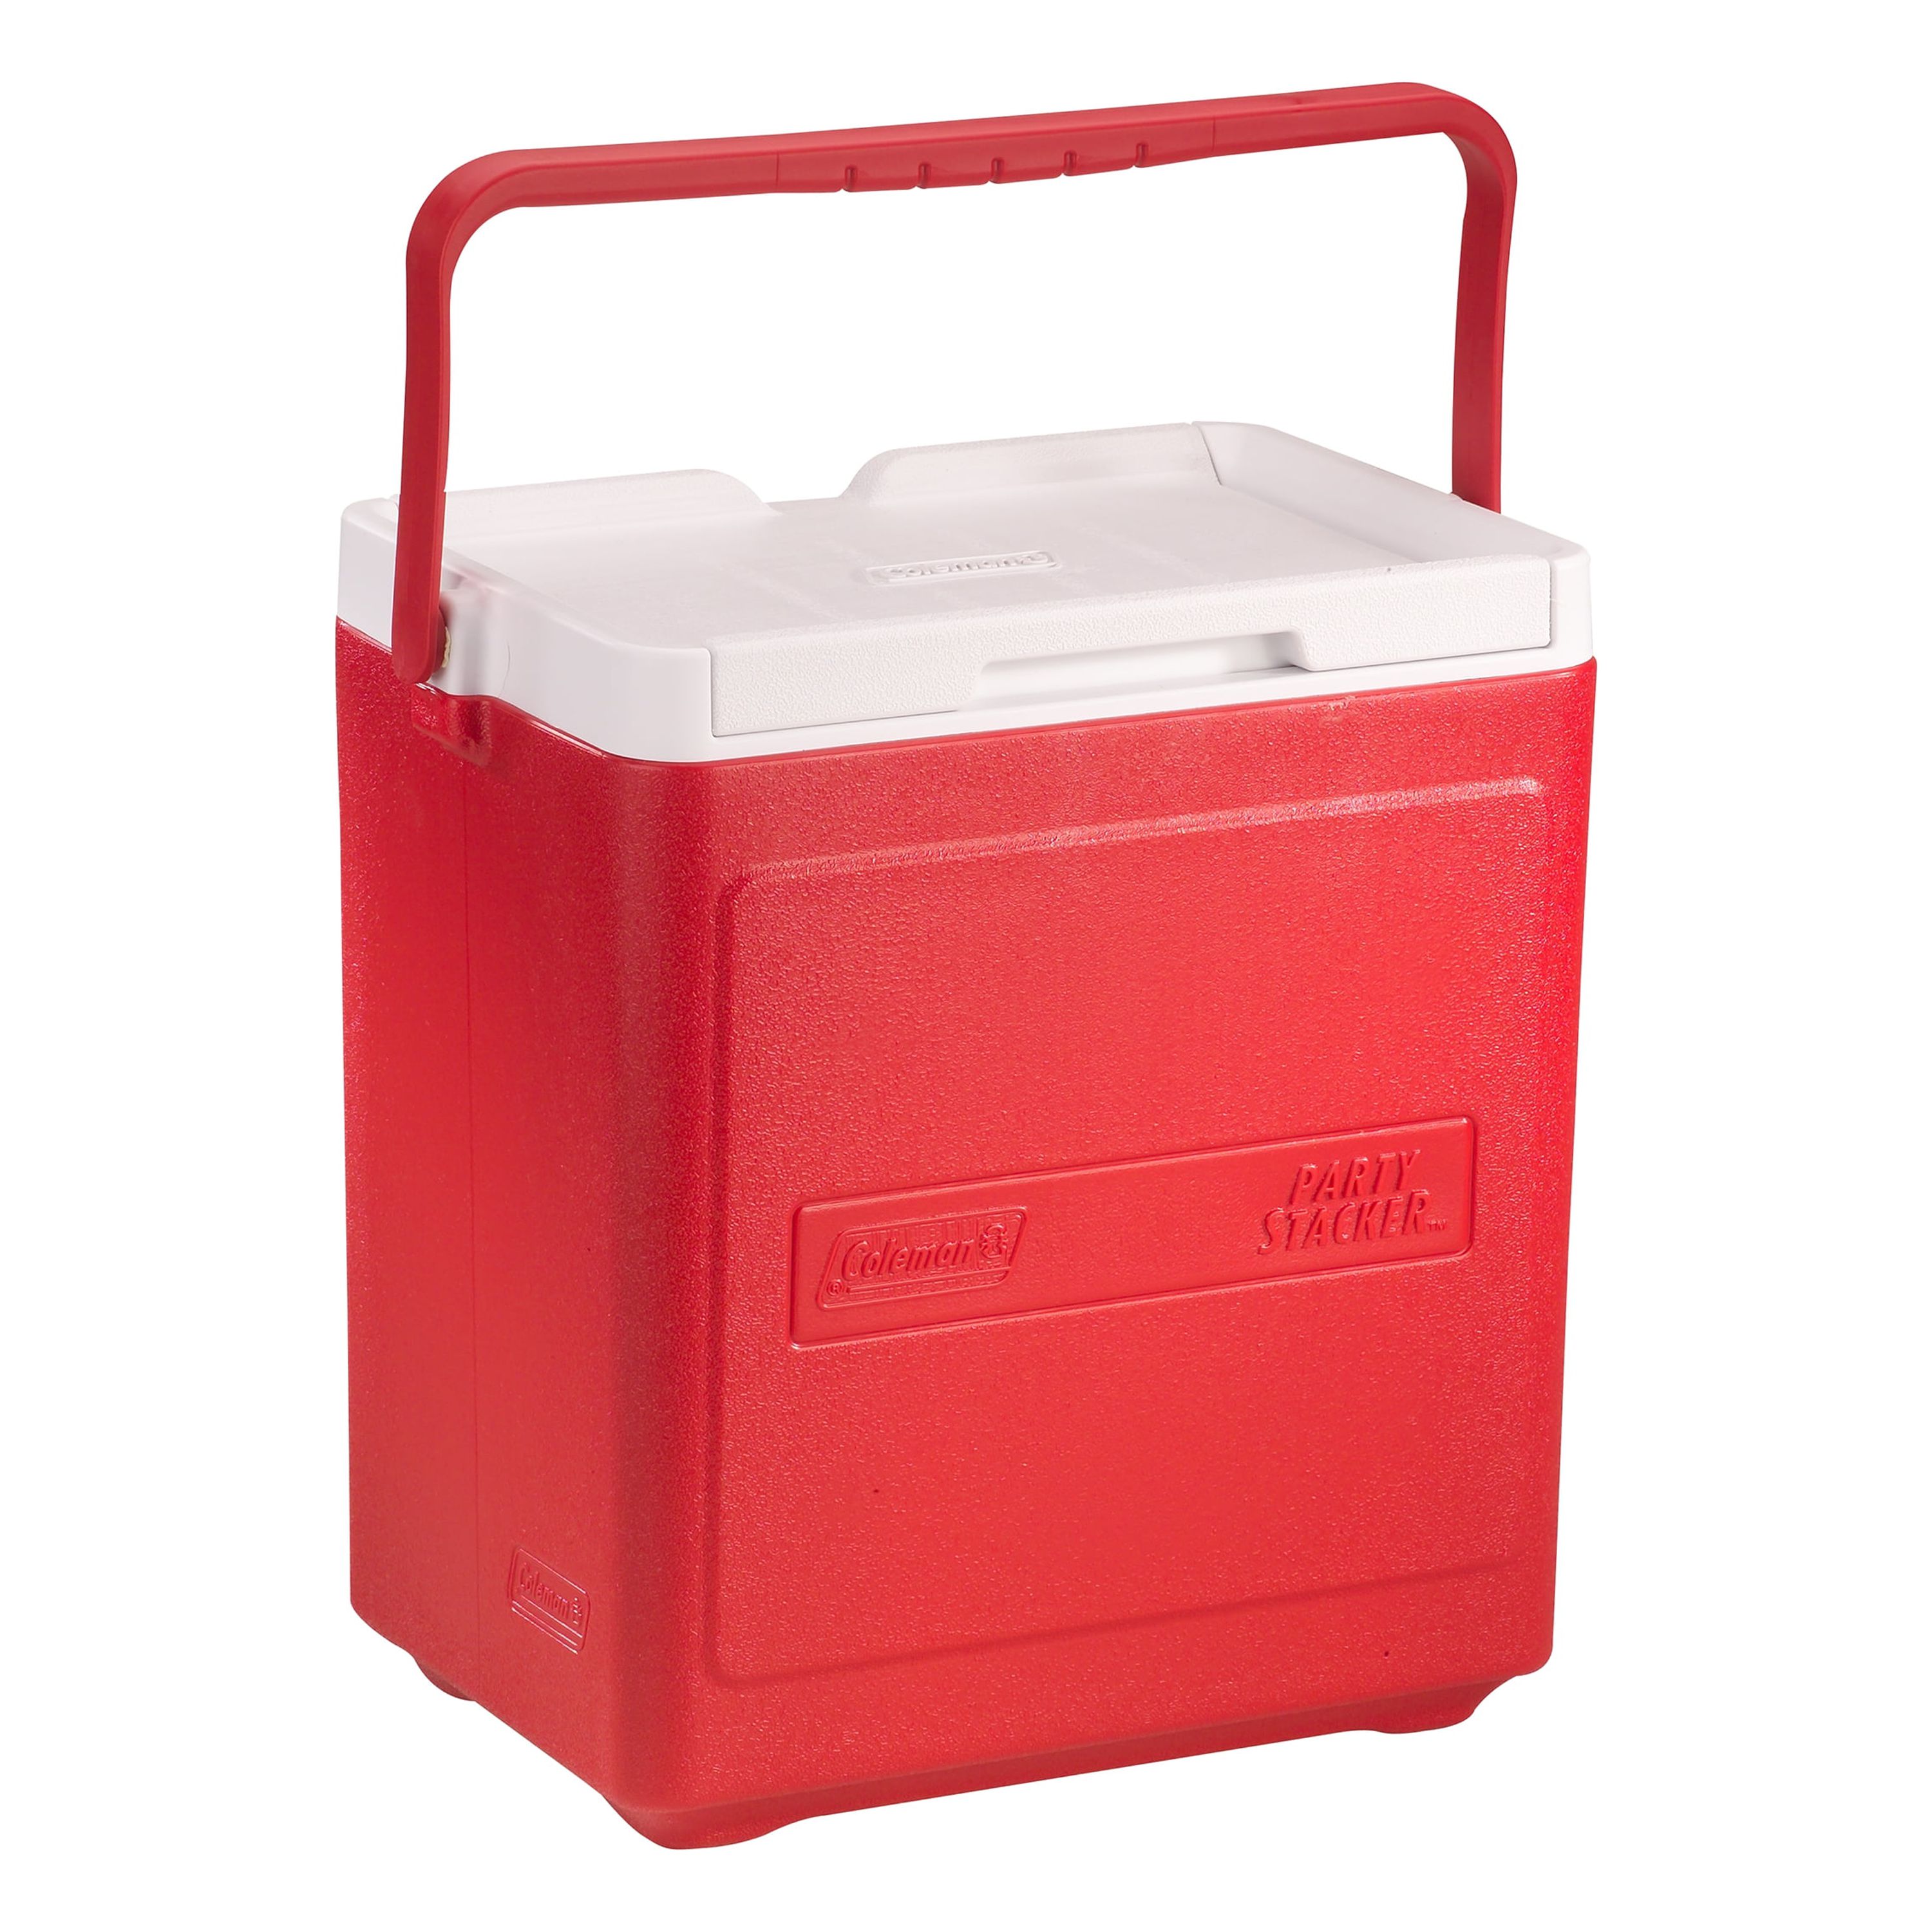 Coleman 20-Can Party Stacker Cooler - image 1 of 2